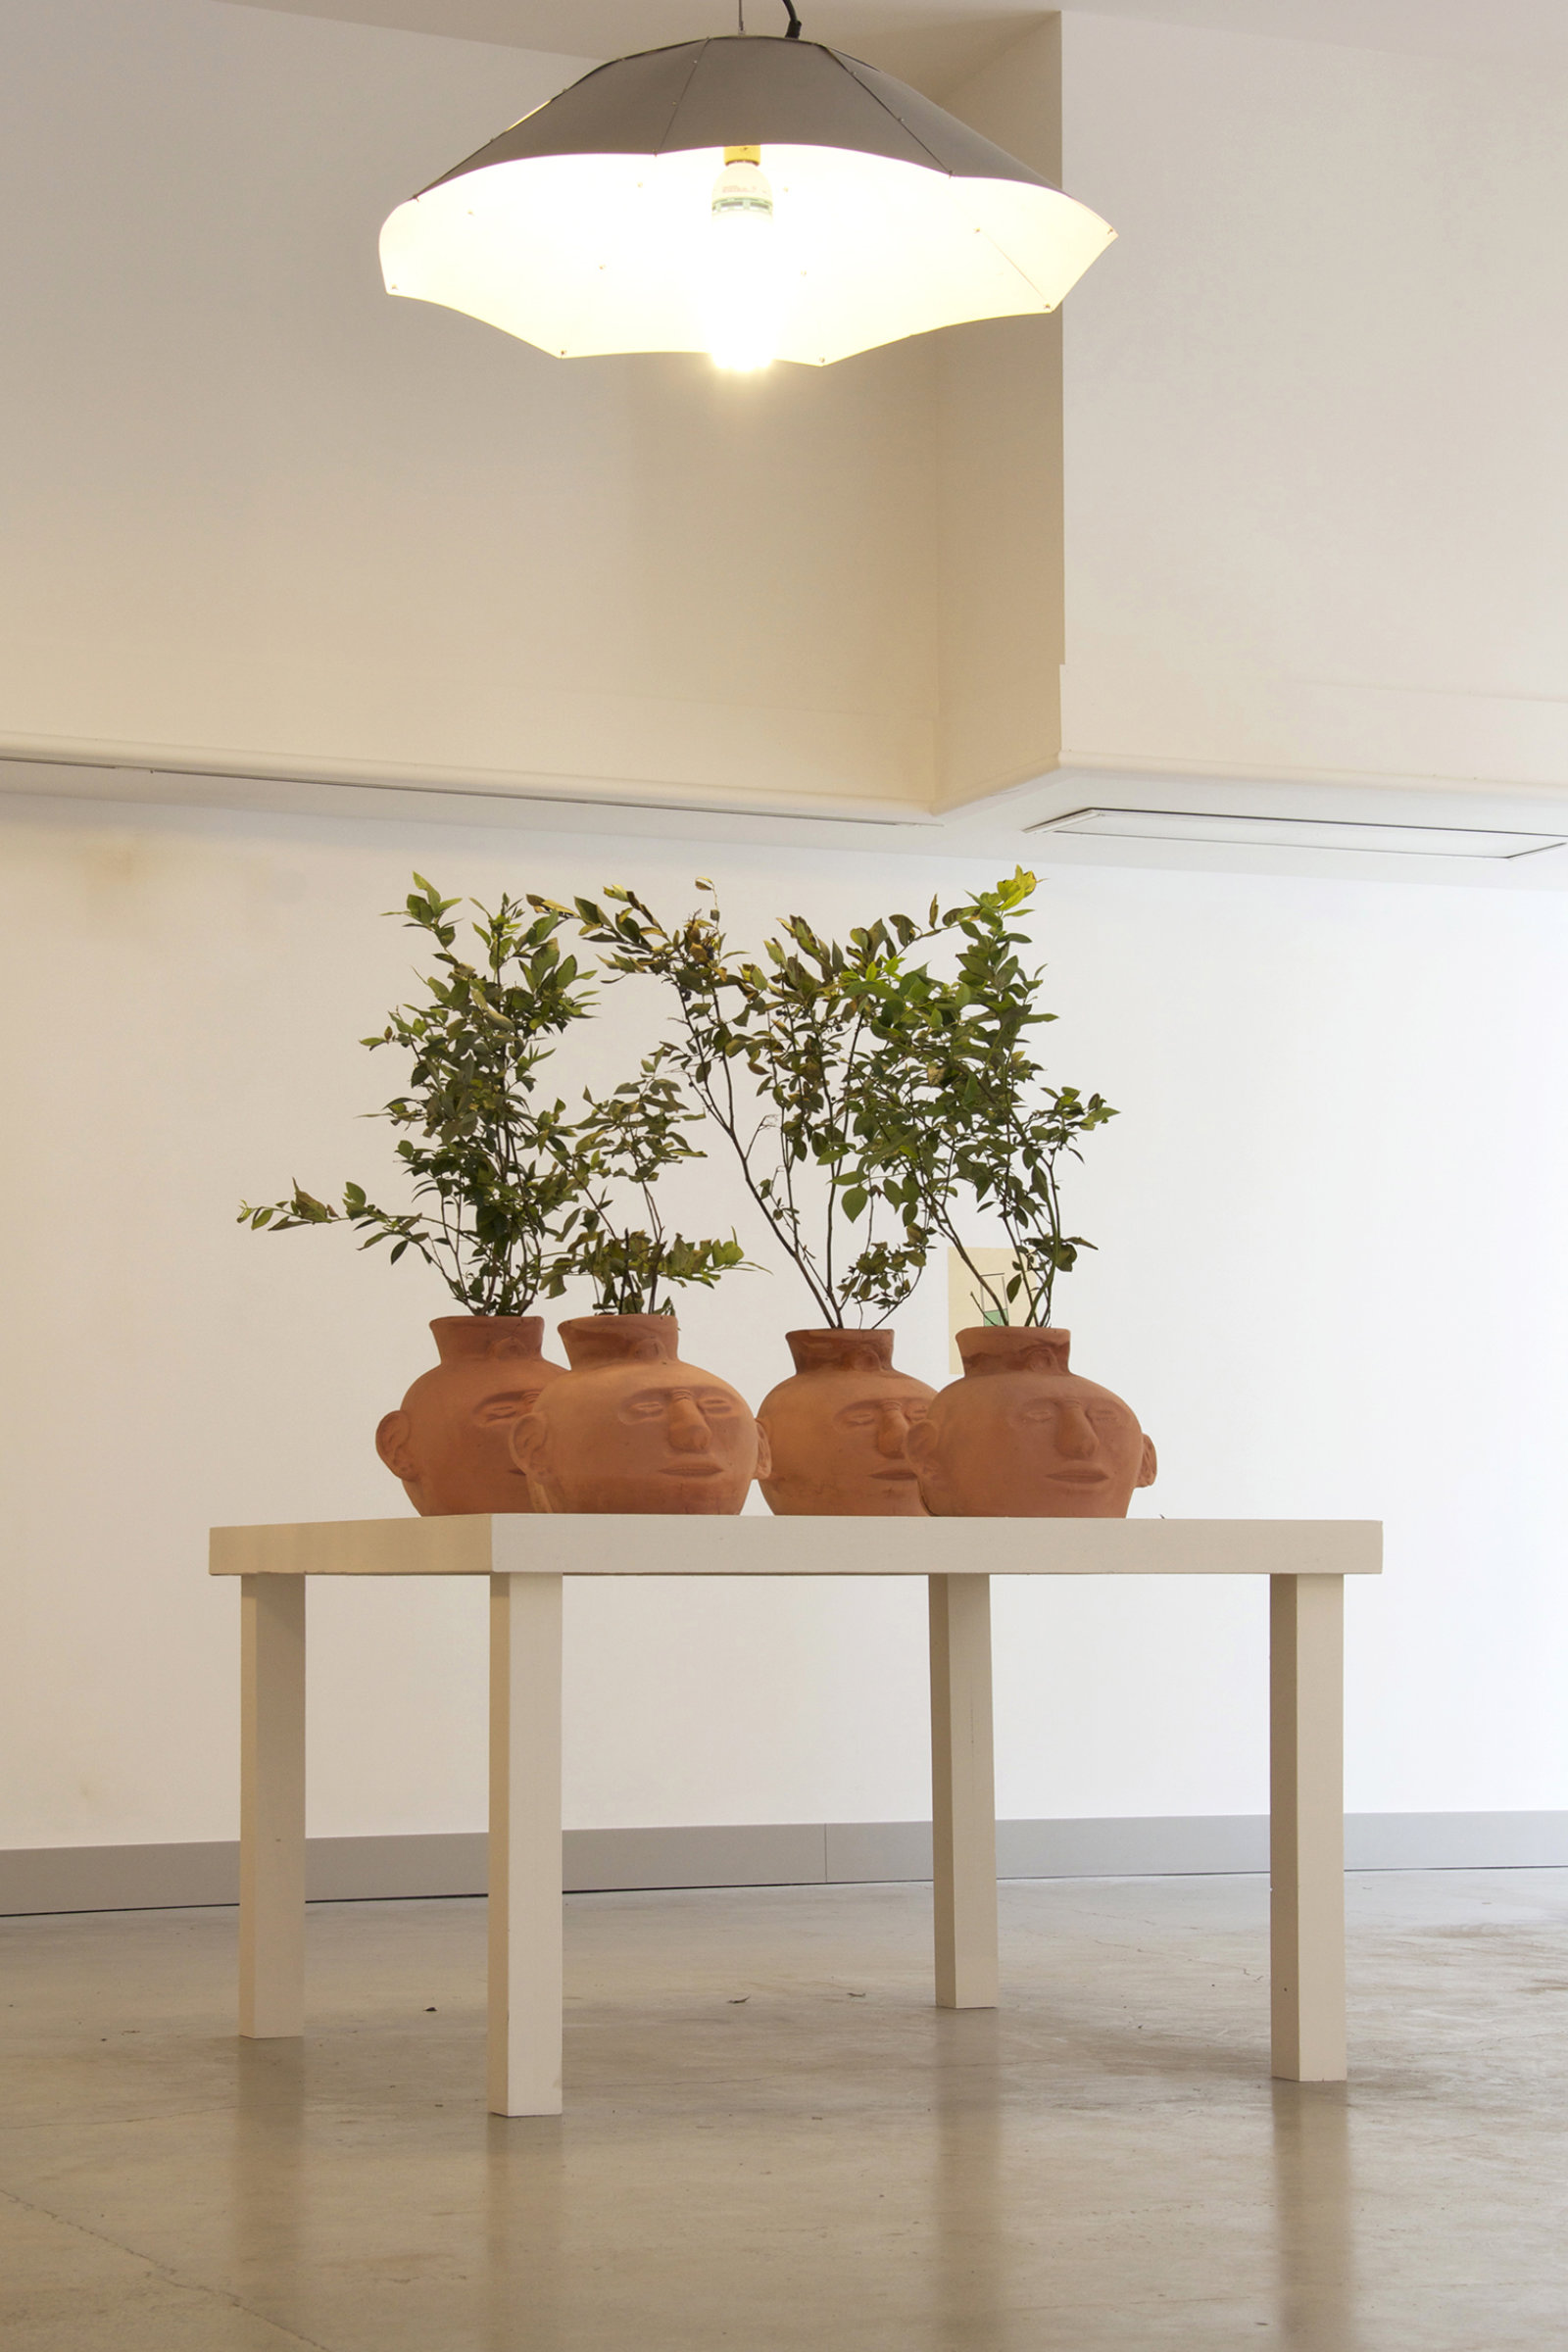 Duane Linklater, Blueberries for 12 Vessels, 2015, blueberry bushes, clay, earth, dimensions variable